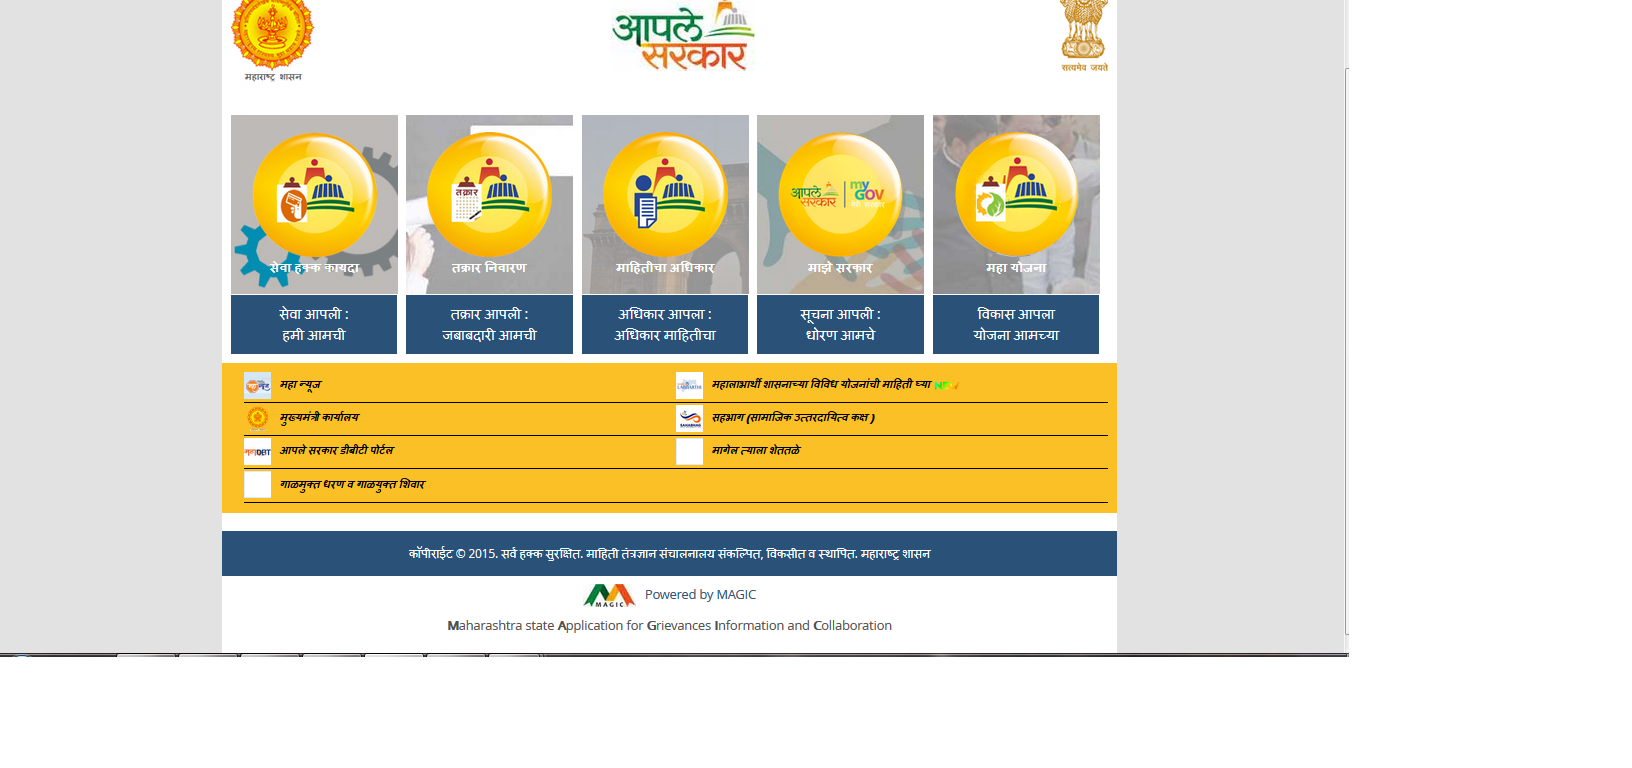 National Voters Services Portal